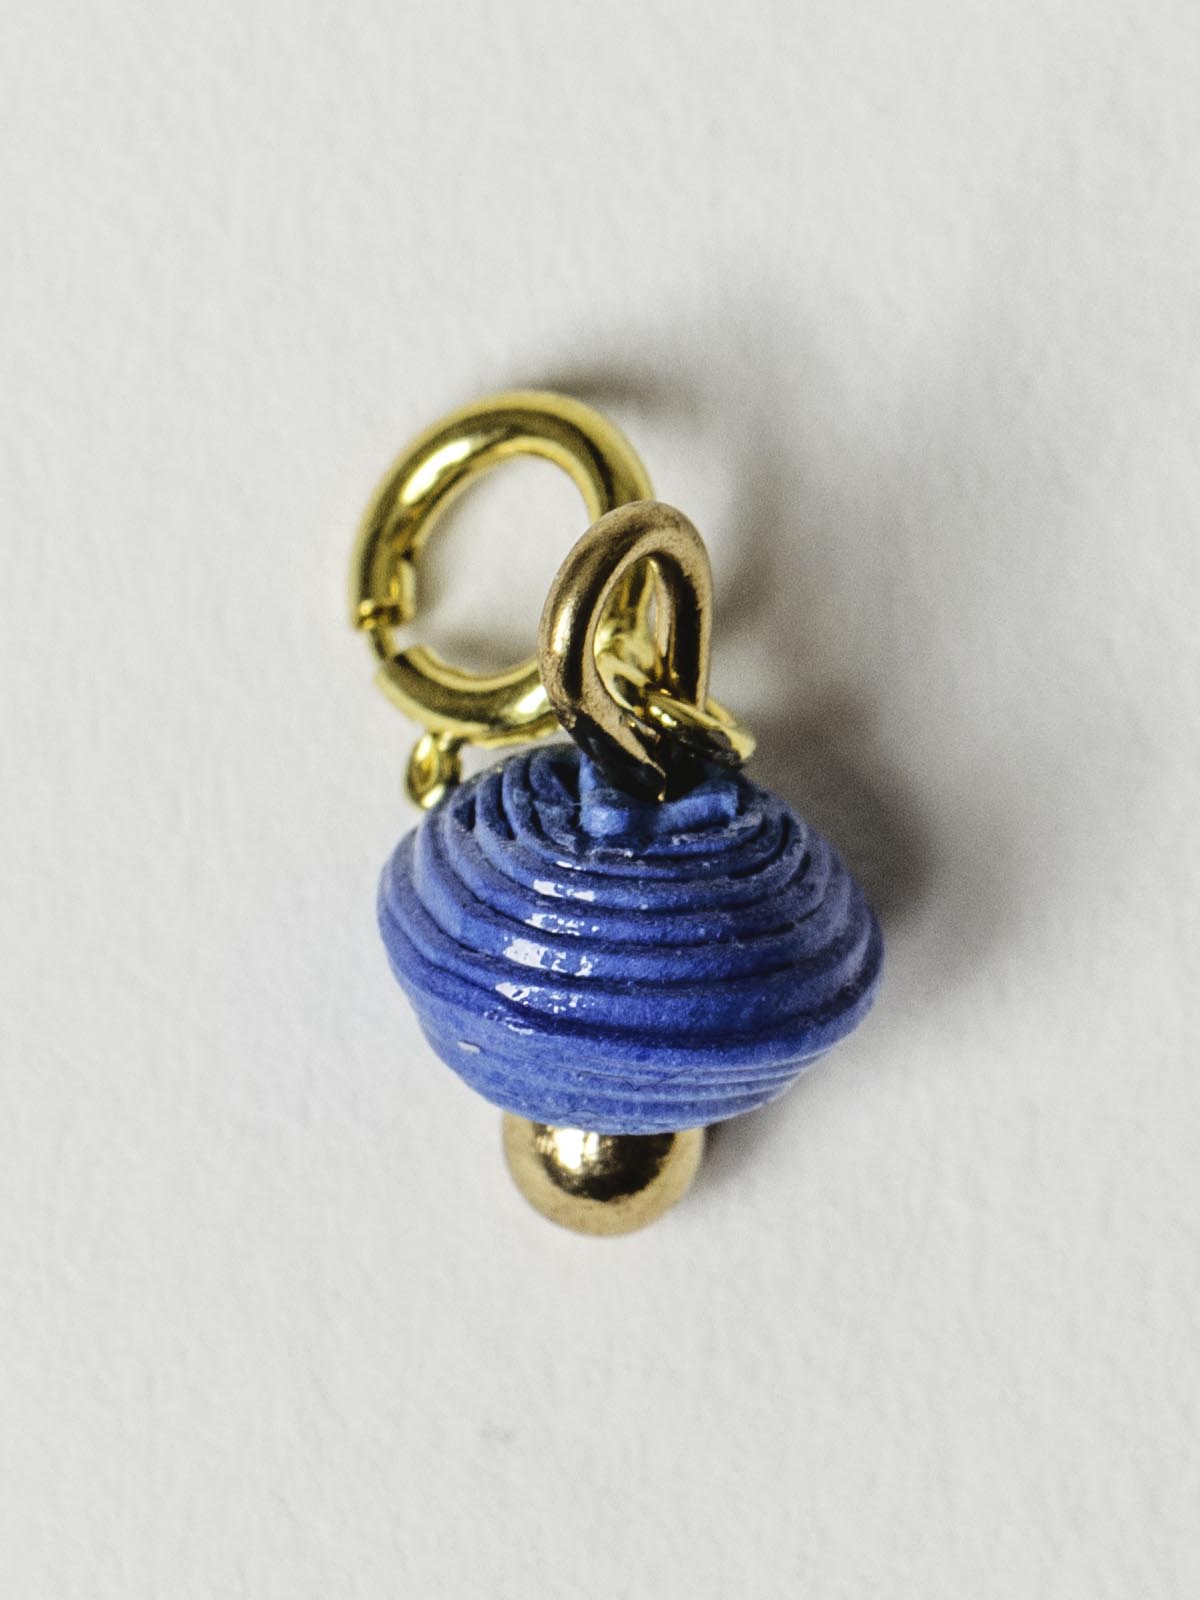 True  blue bead charm on gold clasp. 